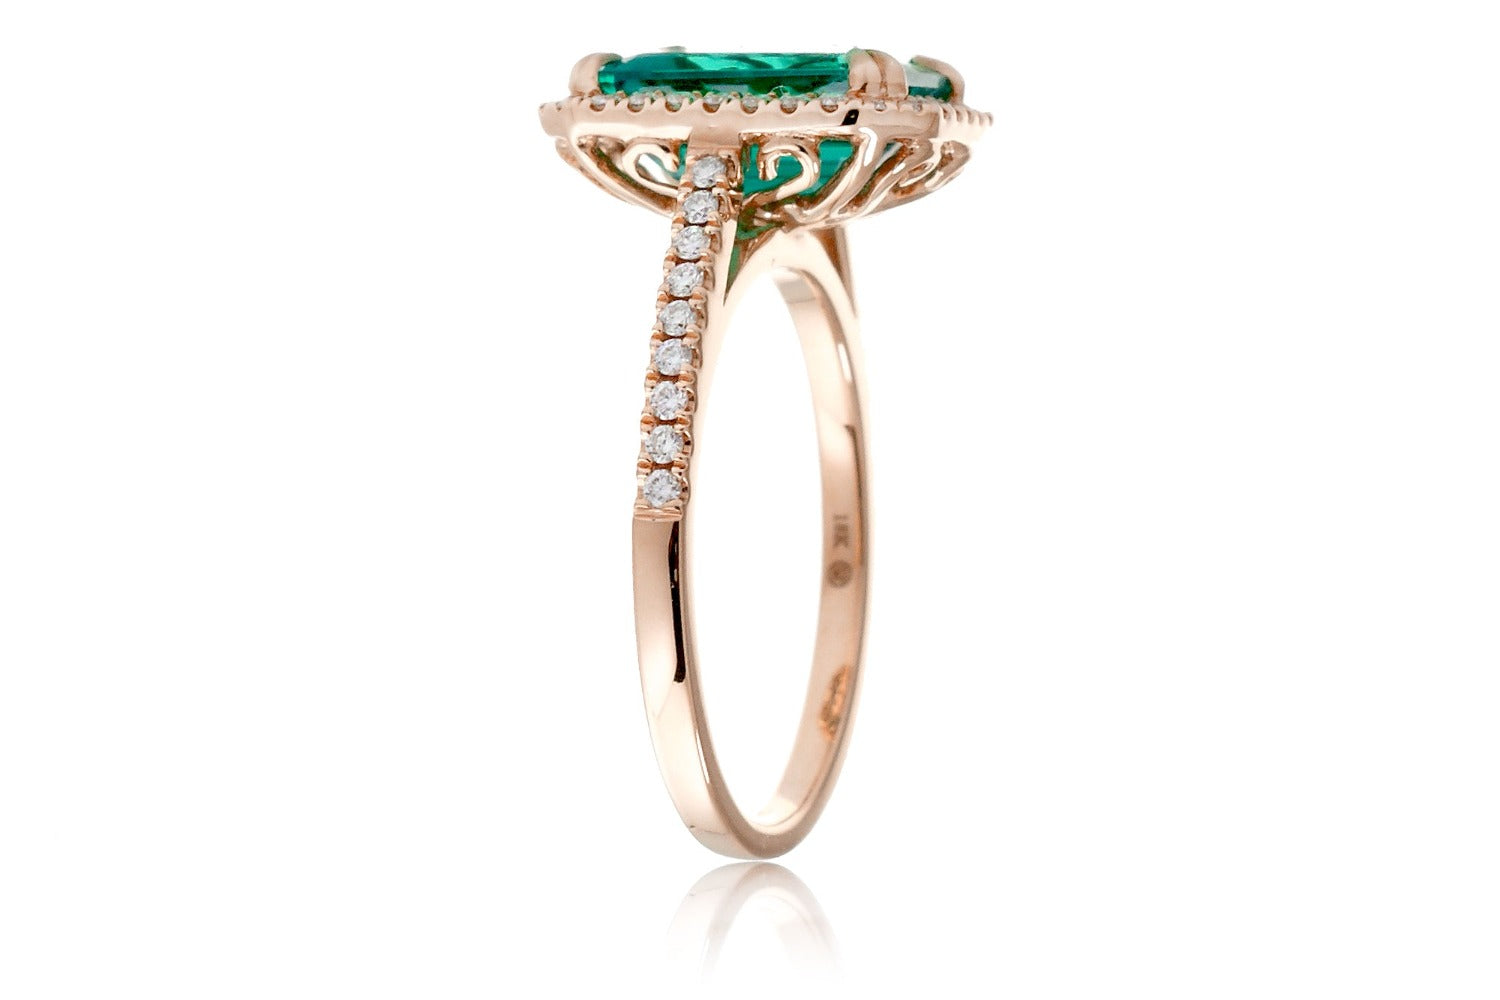 Emerald Cut Emerald With Diamond Halo Engagement Ring In Rose Gold Cathedral Setting